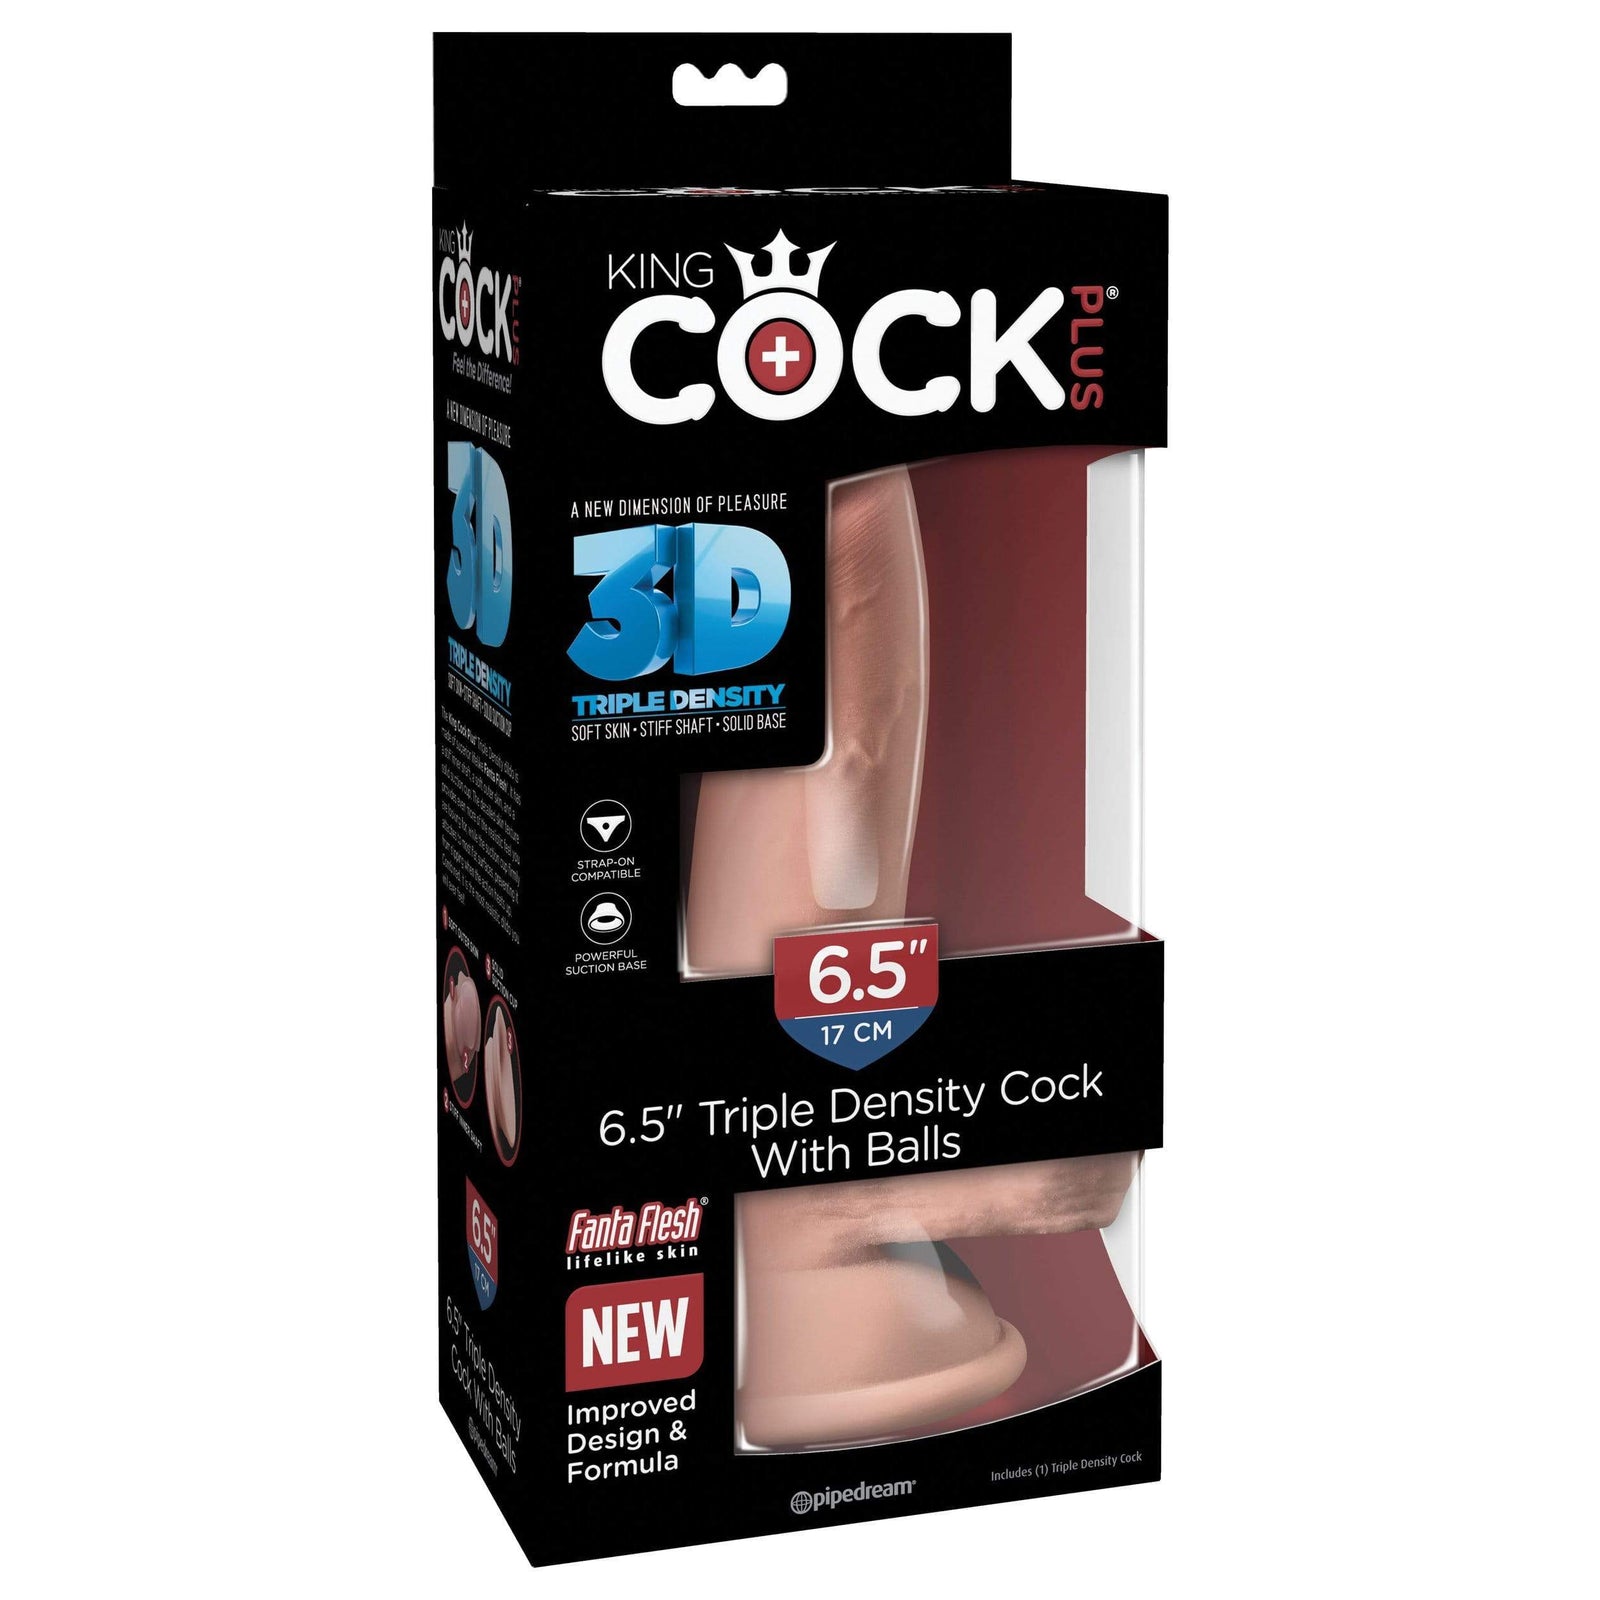 Pipedream - King Cock Plus 3D Triple Density Cock with Balls Dildo 6.5" (Beige) Realistic Dildo with suction cup (Non Vibration) 603912762501 CherryAffairs